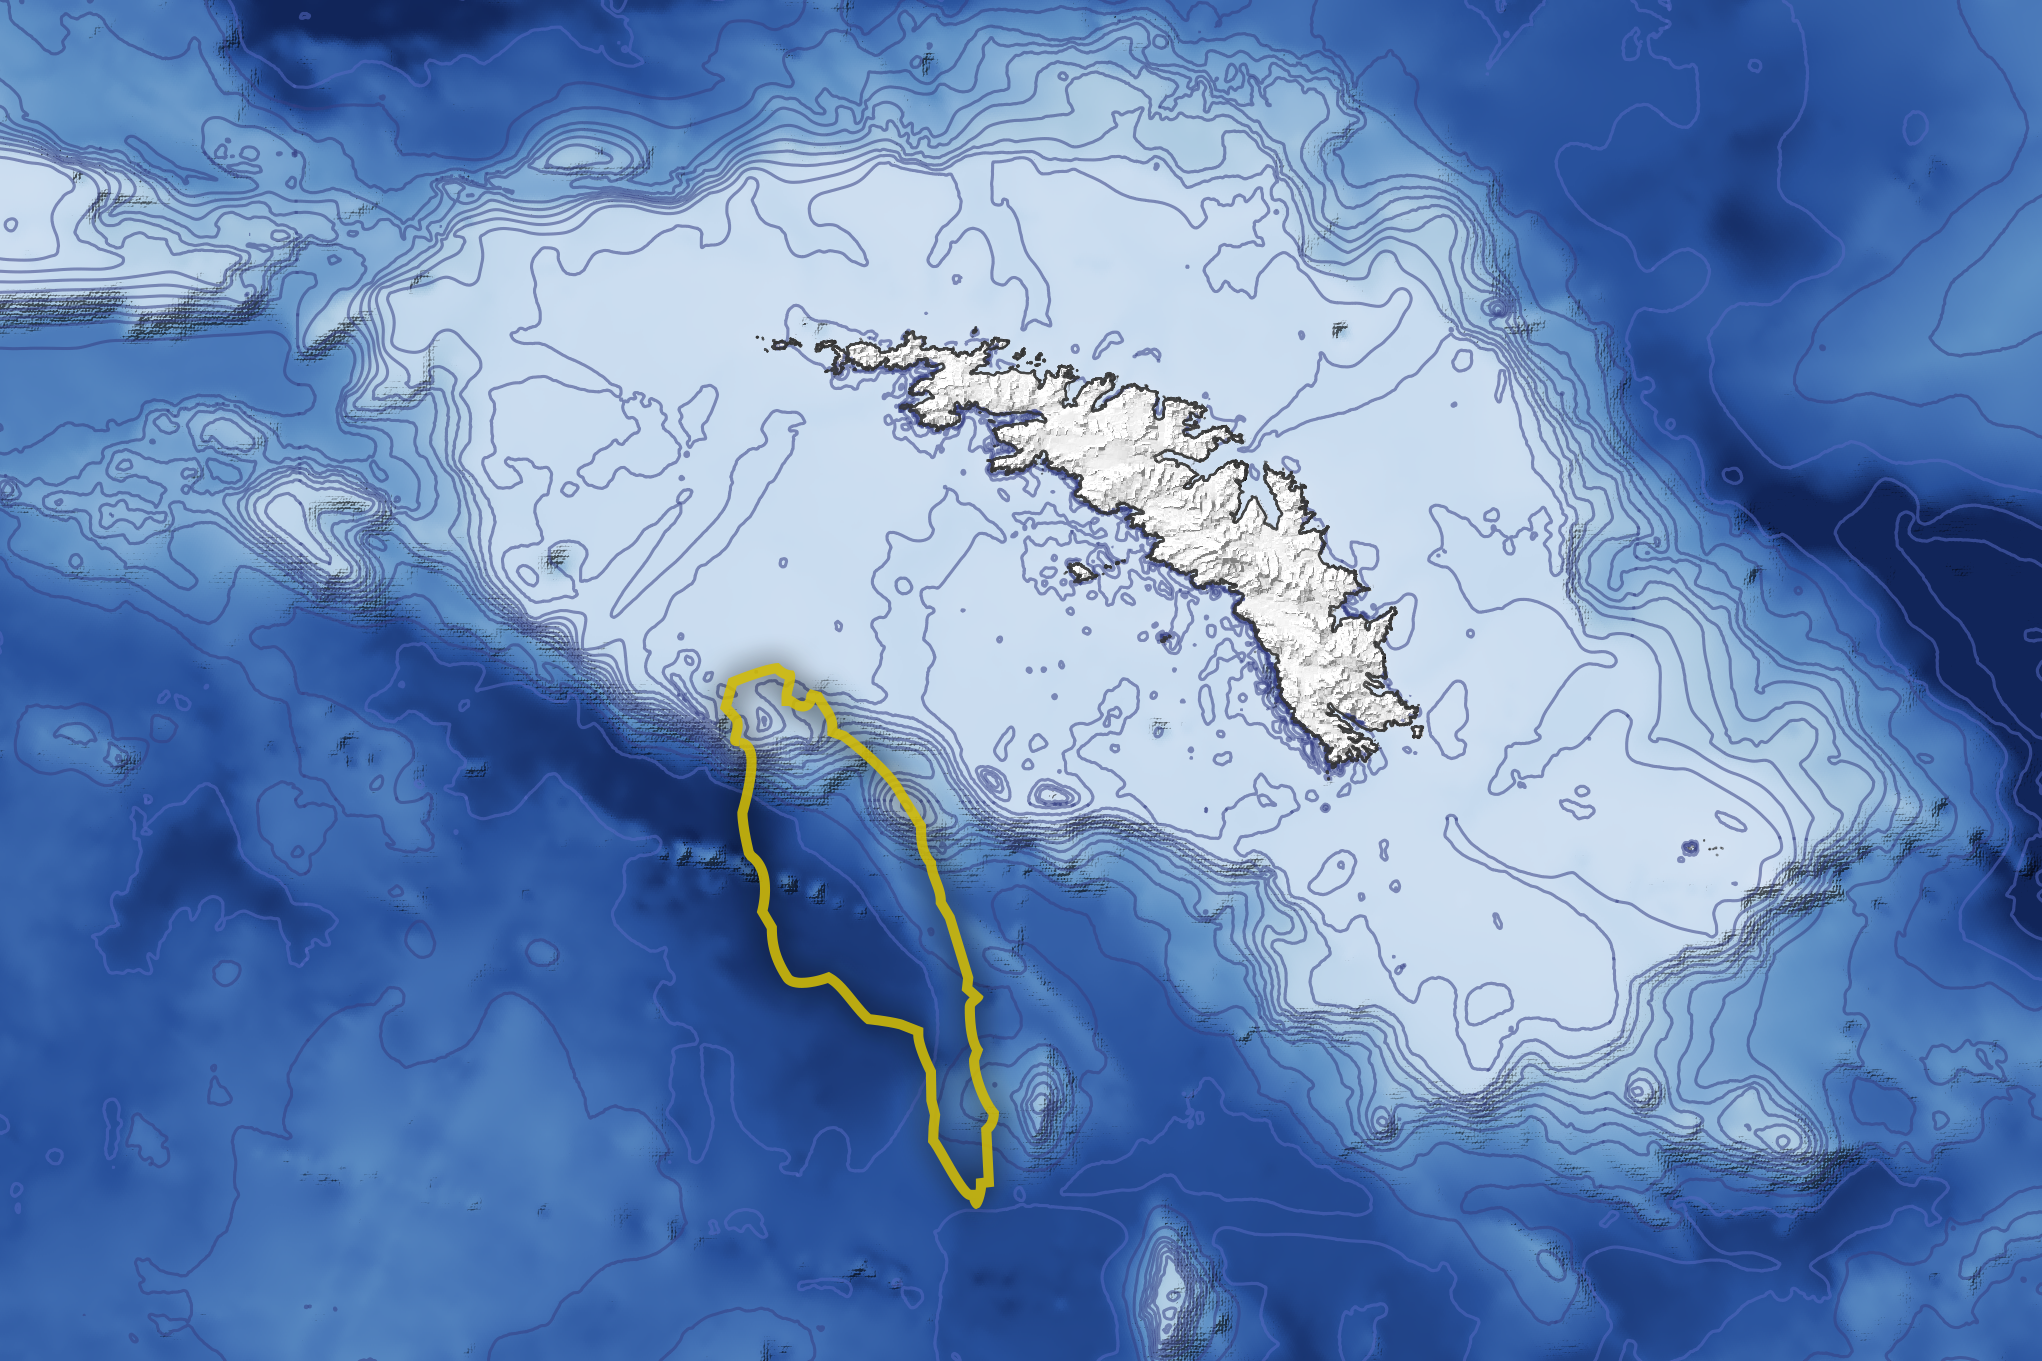 Topographic image showing the northern portion of iceberg A68a (yellow) drifting over the island's shallow submarine shelf. (Image: British Oceanographic Data Centre’s Global Bathmetric Chart of the Oceans (GEBCO)/British Antarctic Survey)